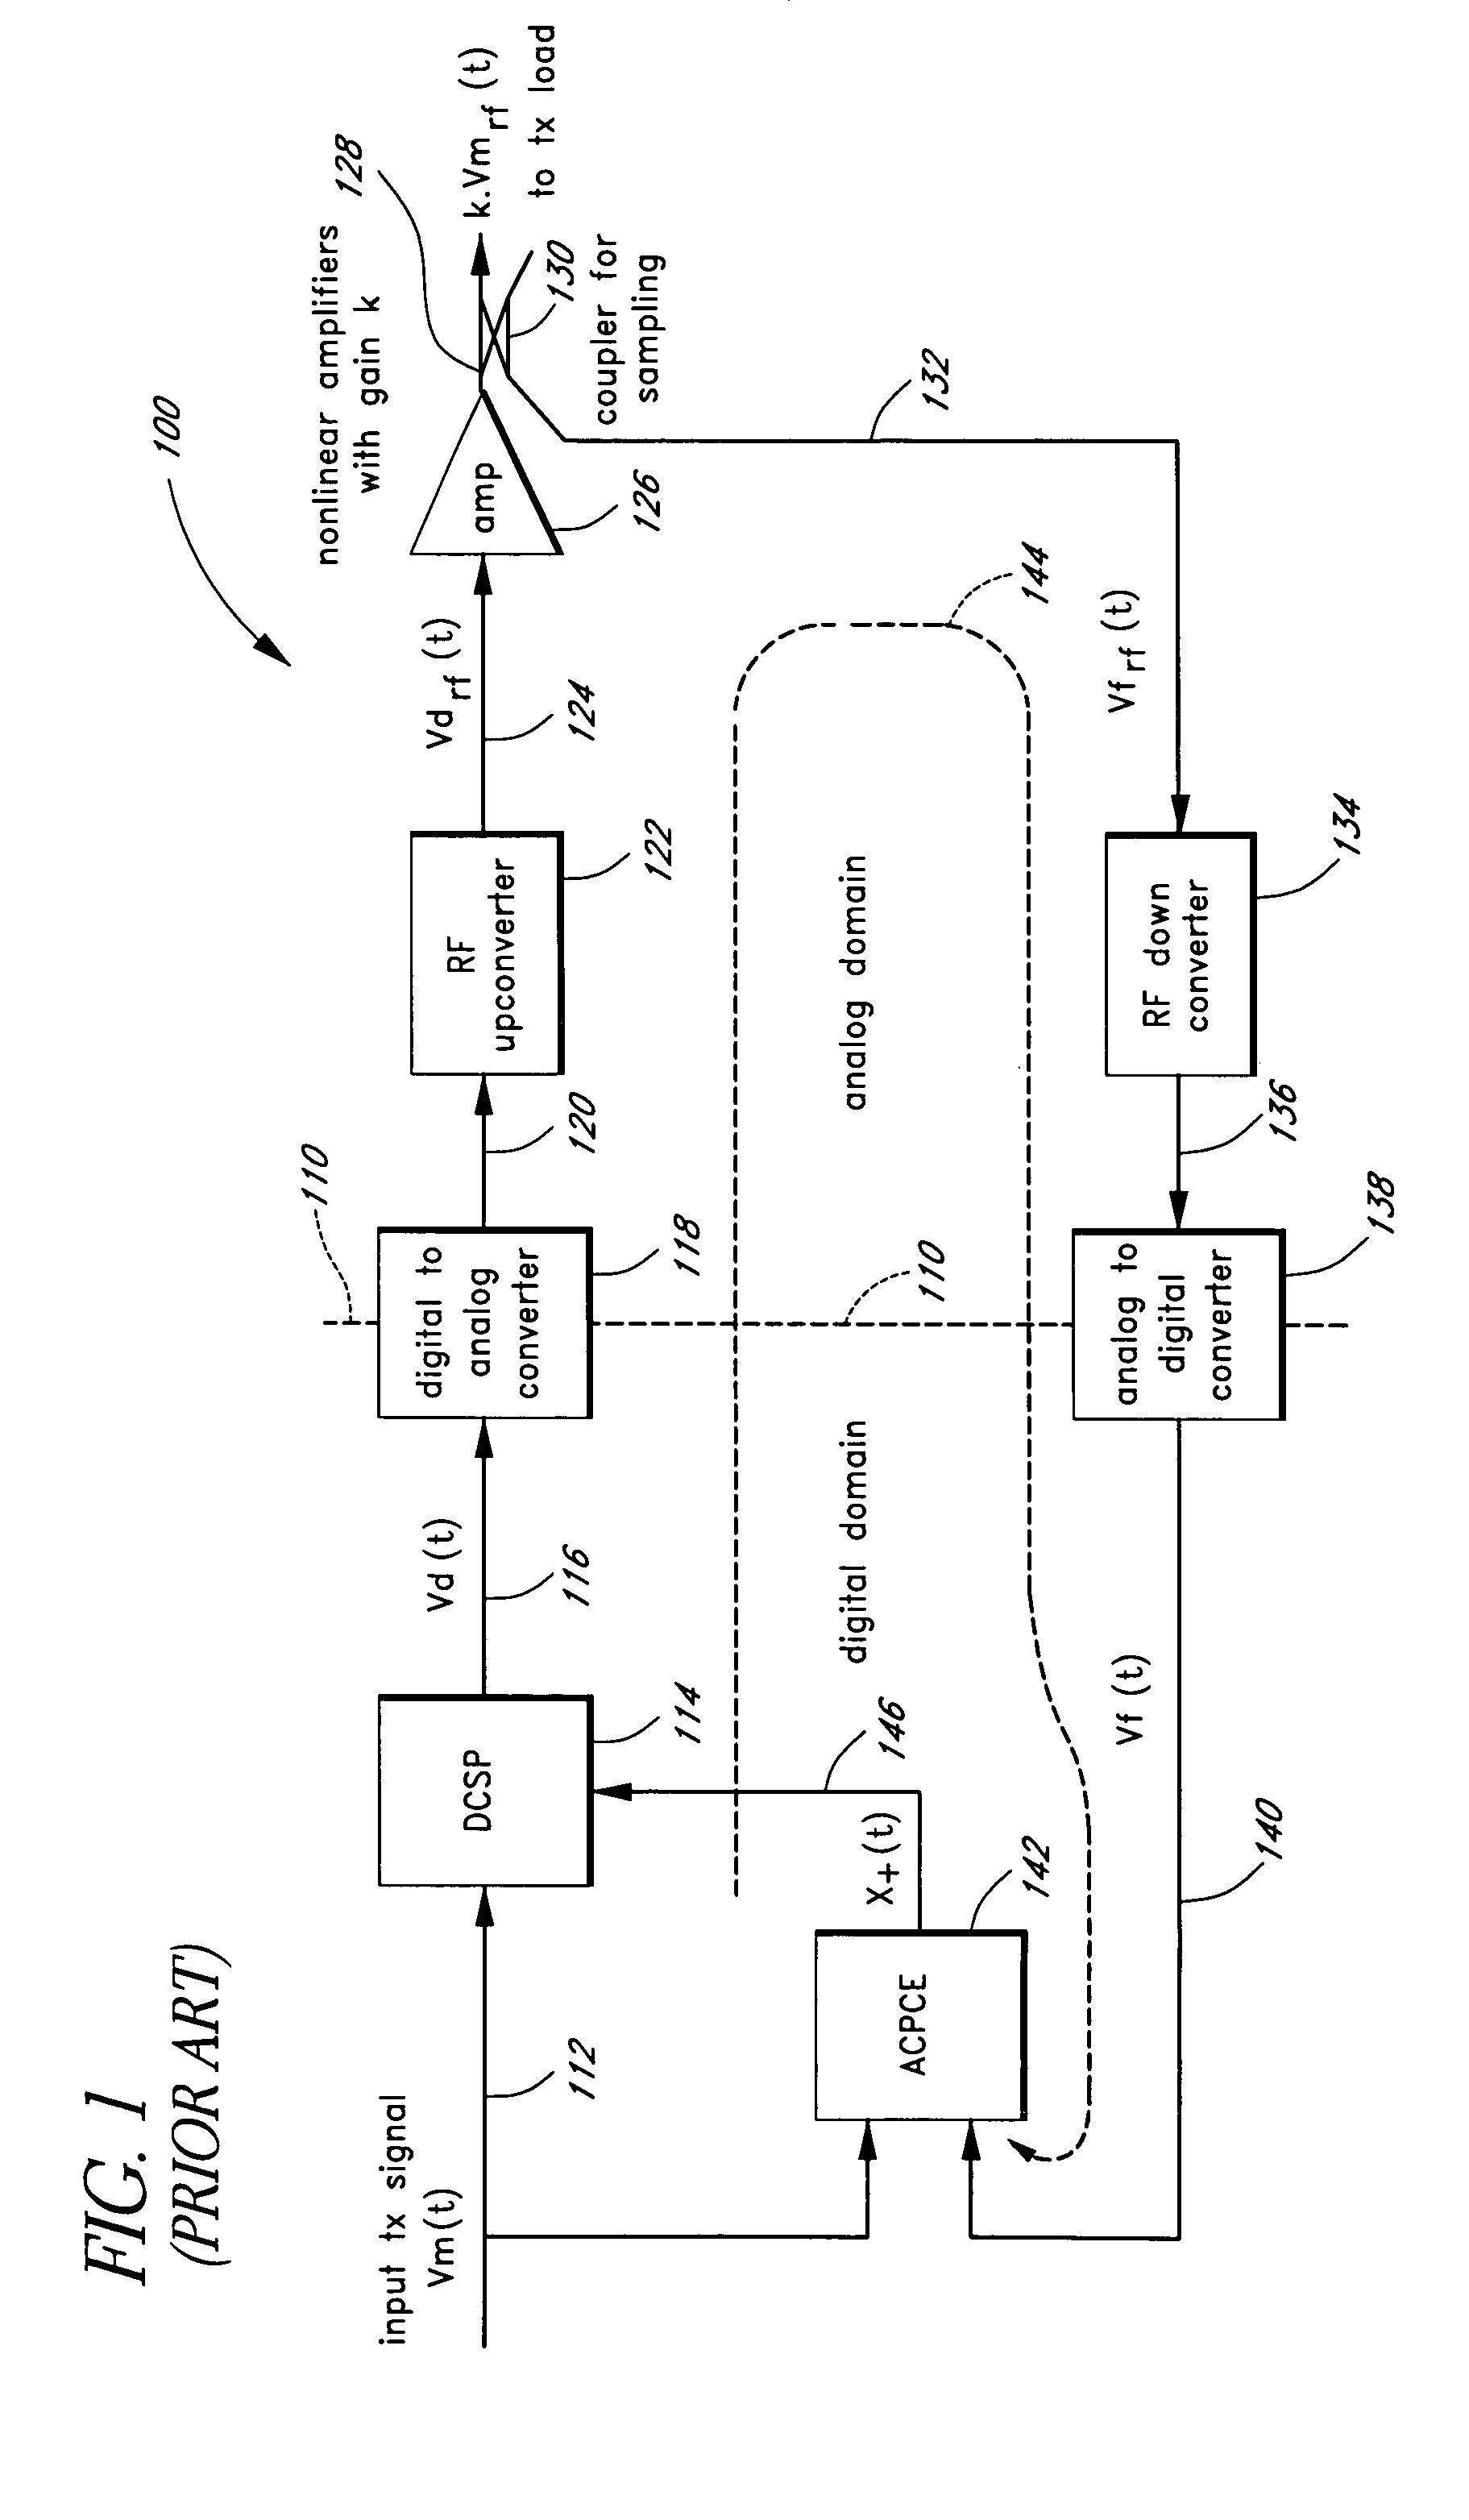 Advanced adaptive pre-distortion in a radio frequency transmitter